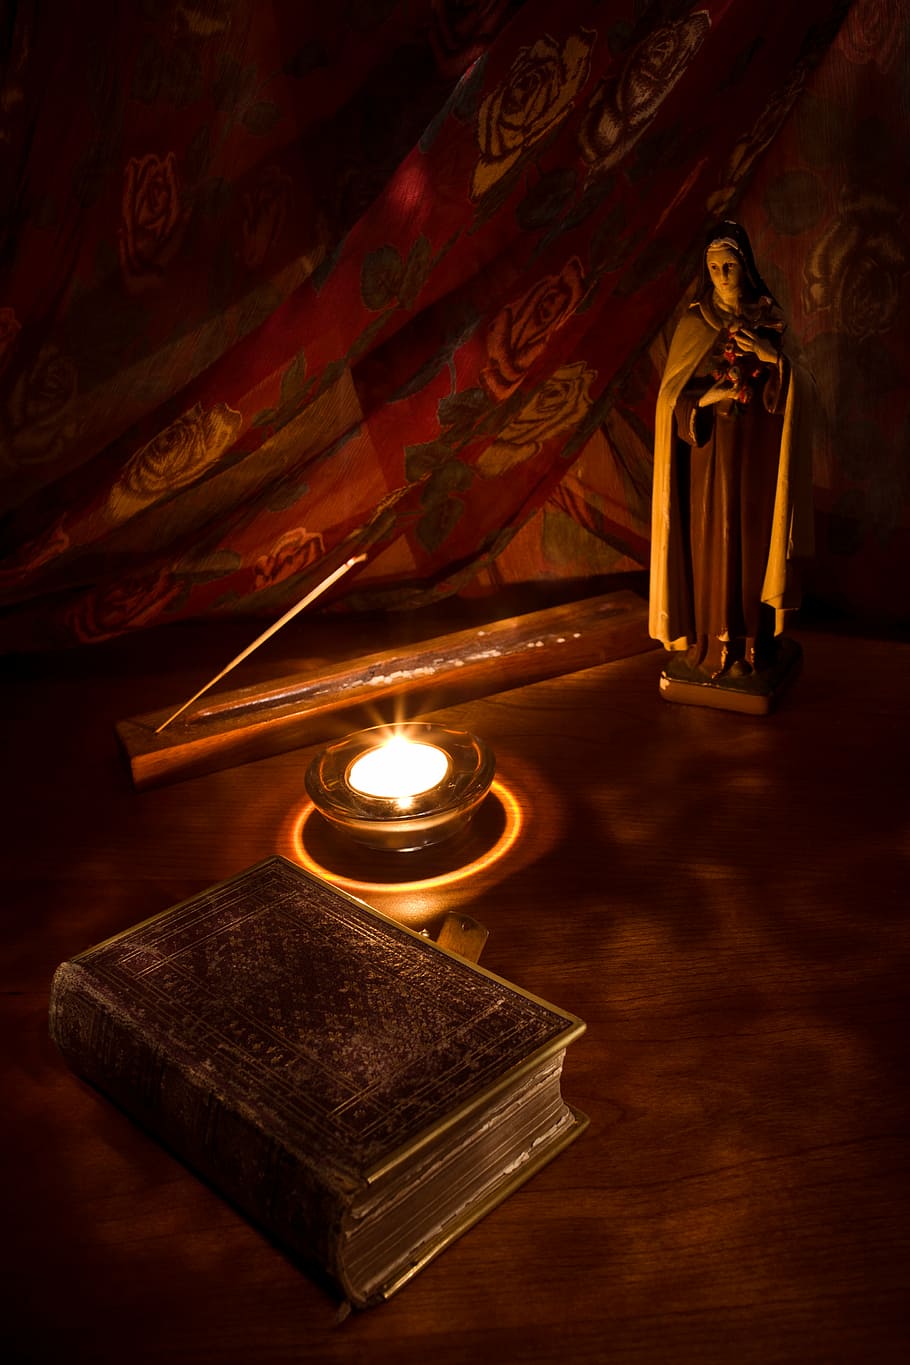 religious figurine near lighted candle and book on brown table